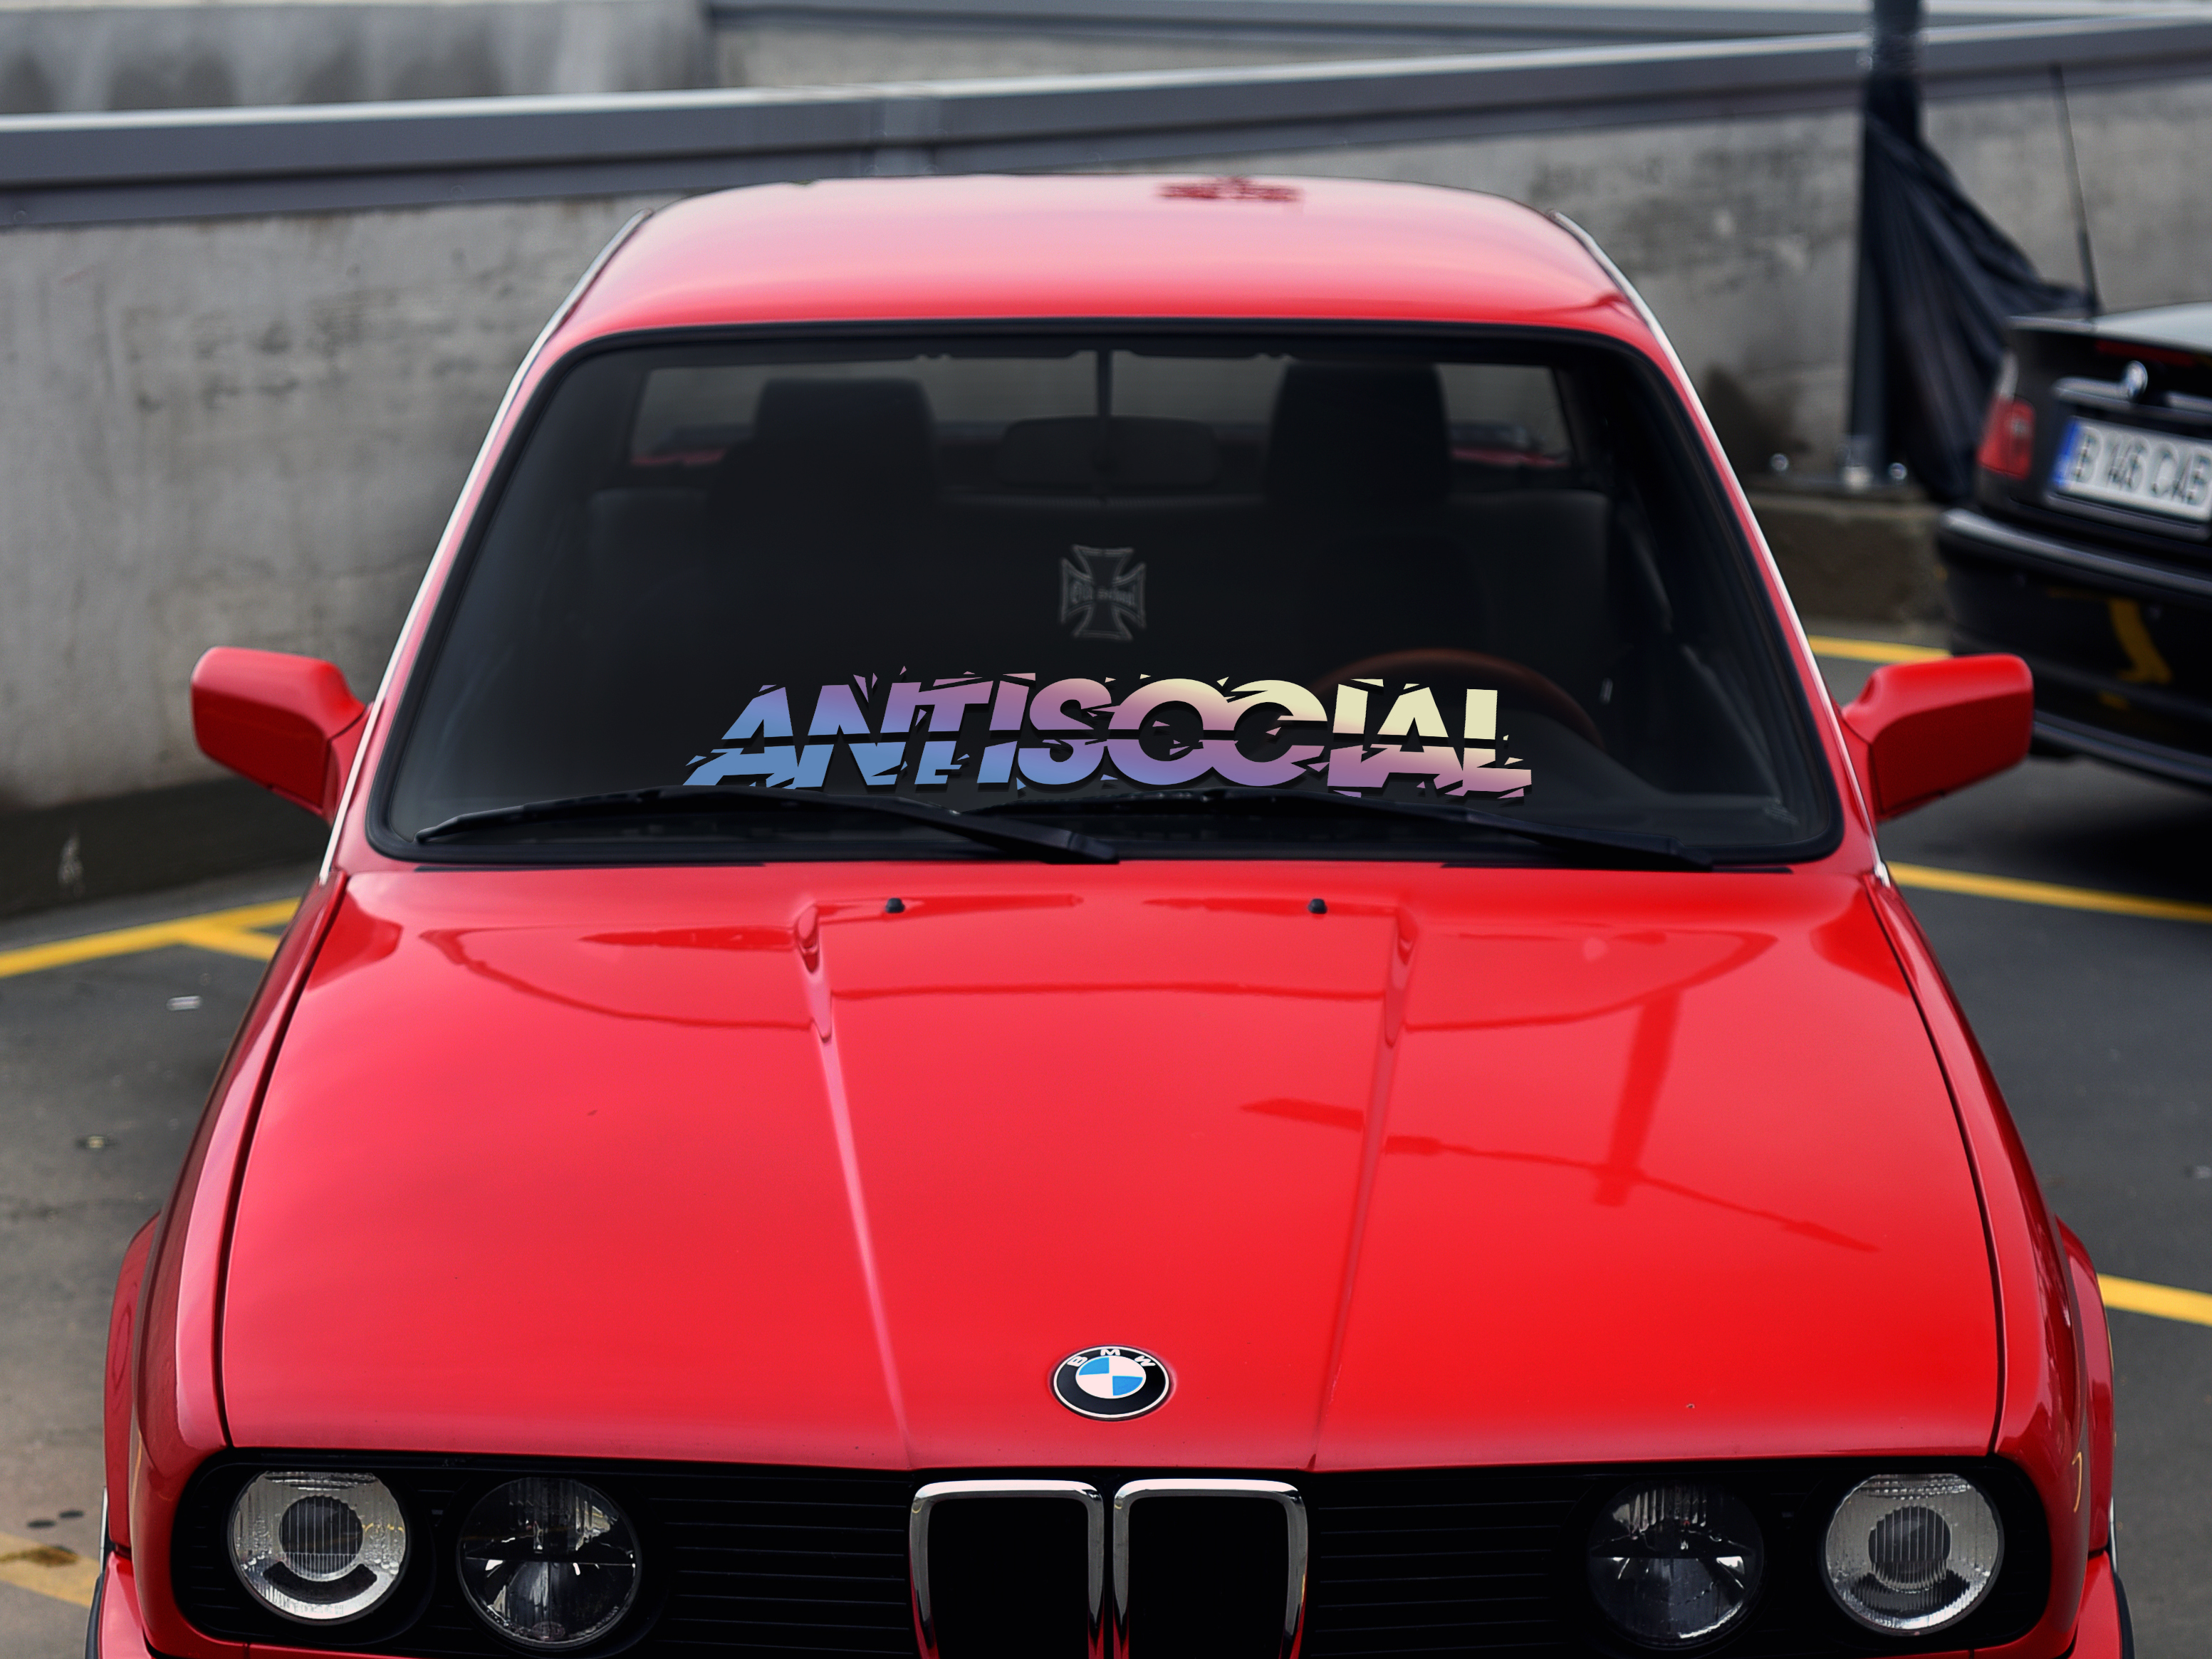 Antisocial windshield banner for cars and trucks. Aggressive style lettering with broken font falling apart in peices.